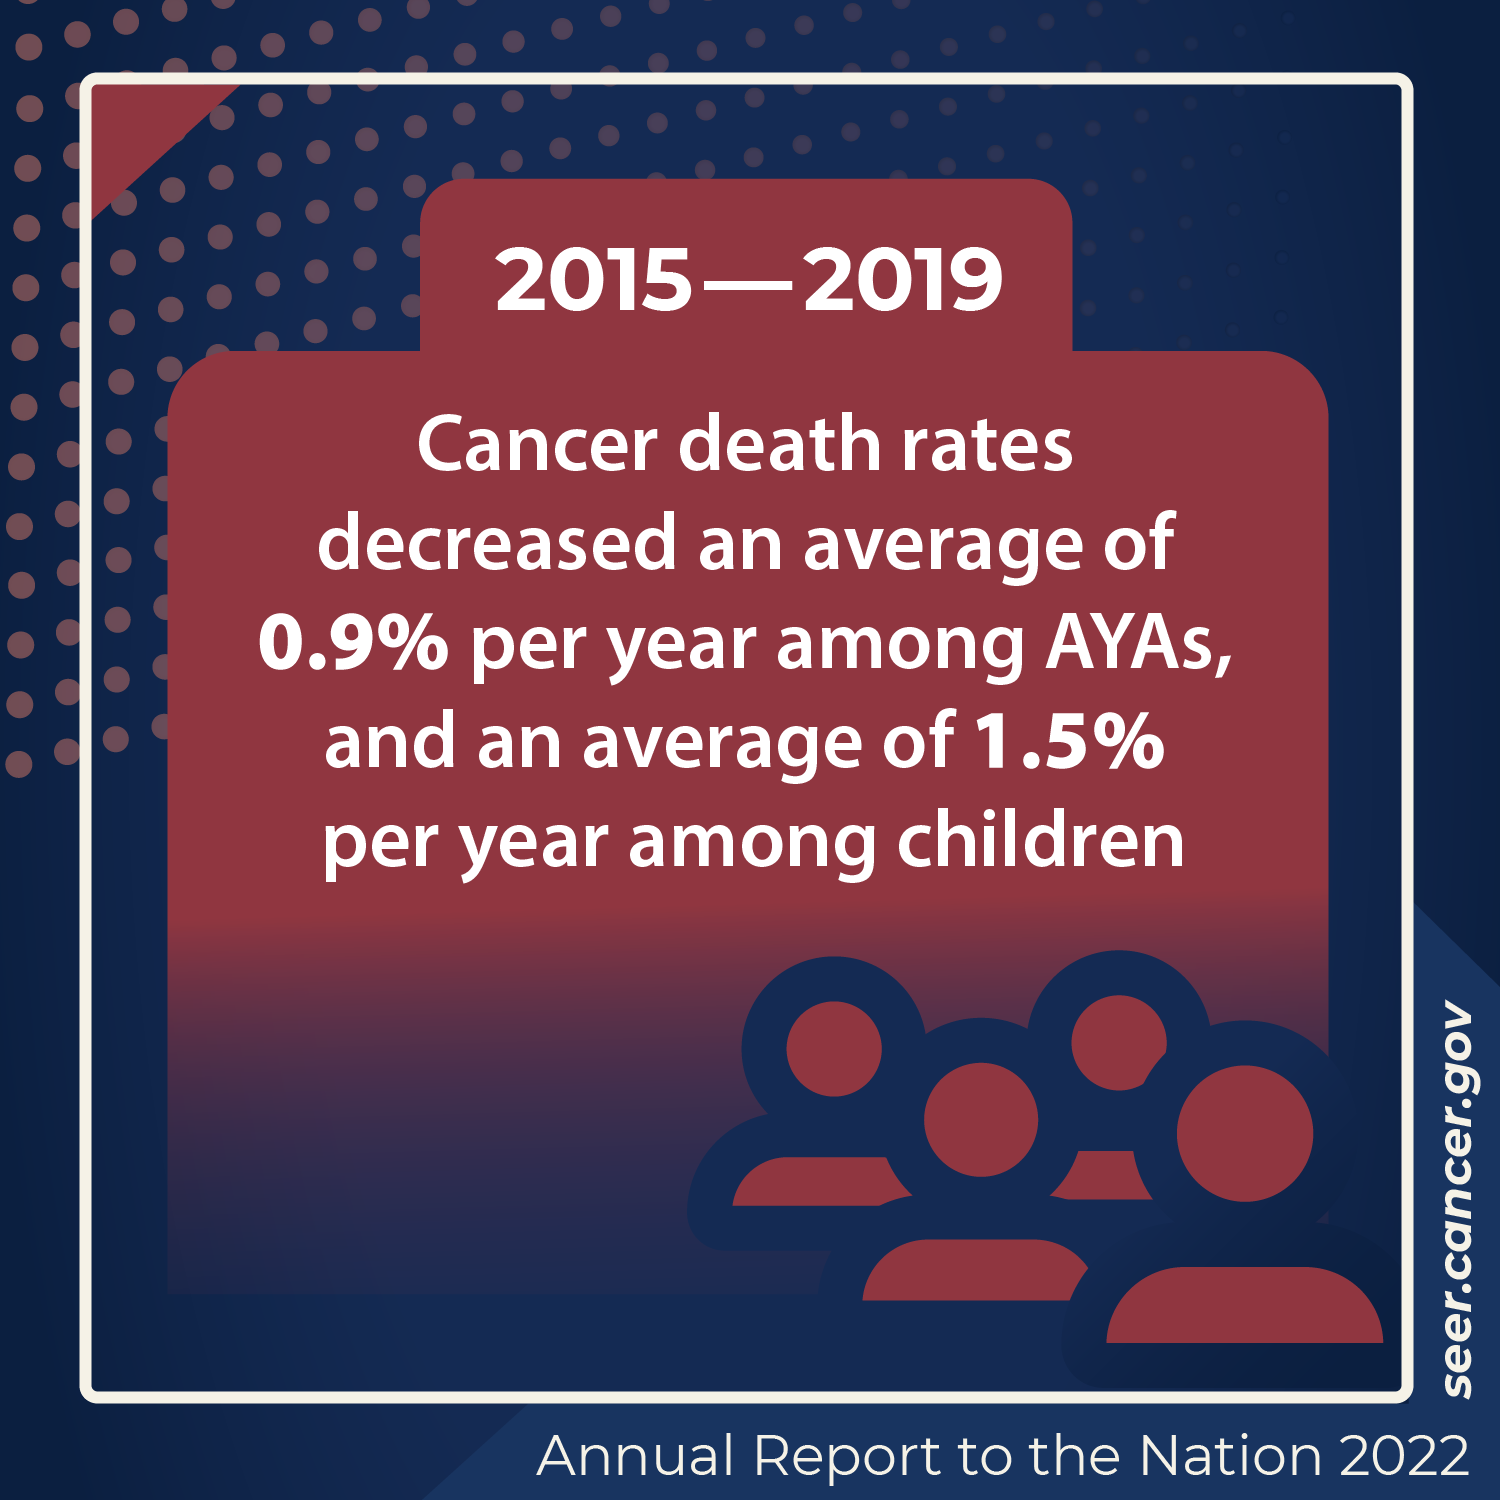 Cancer death rates decreased an average of 0.9% per year among AYAs, and an average of 1.5% per year among children between 2015 and 2019.